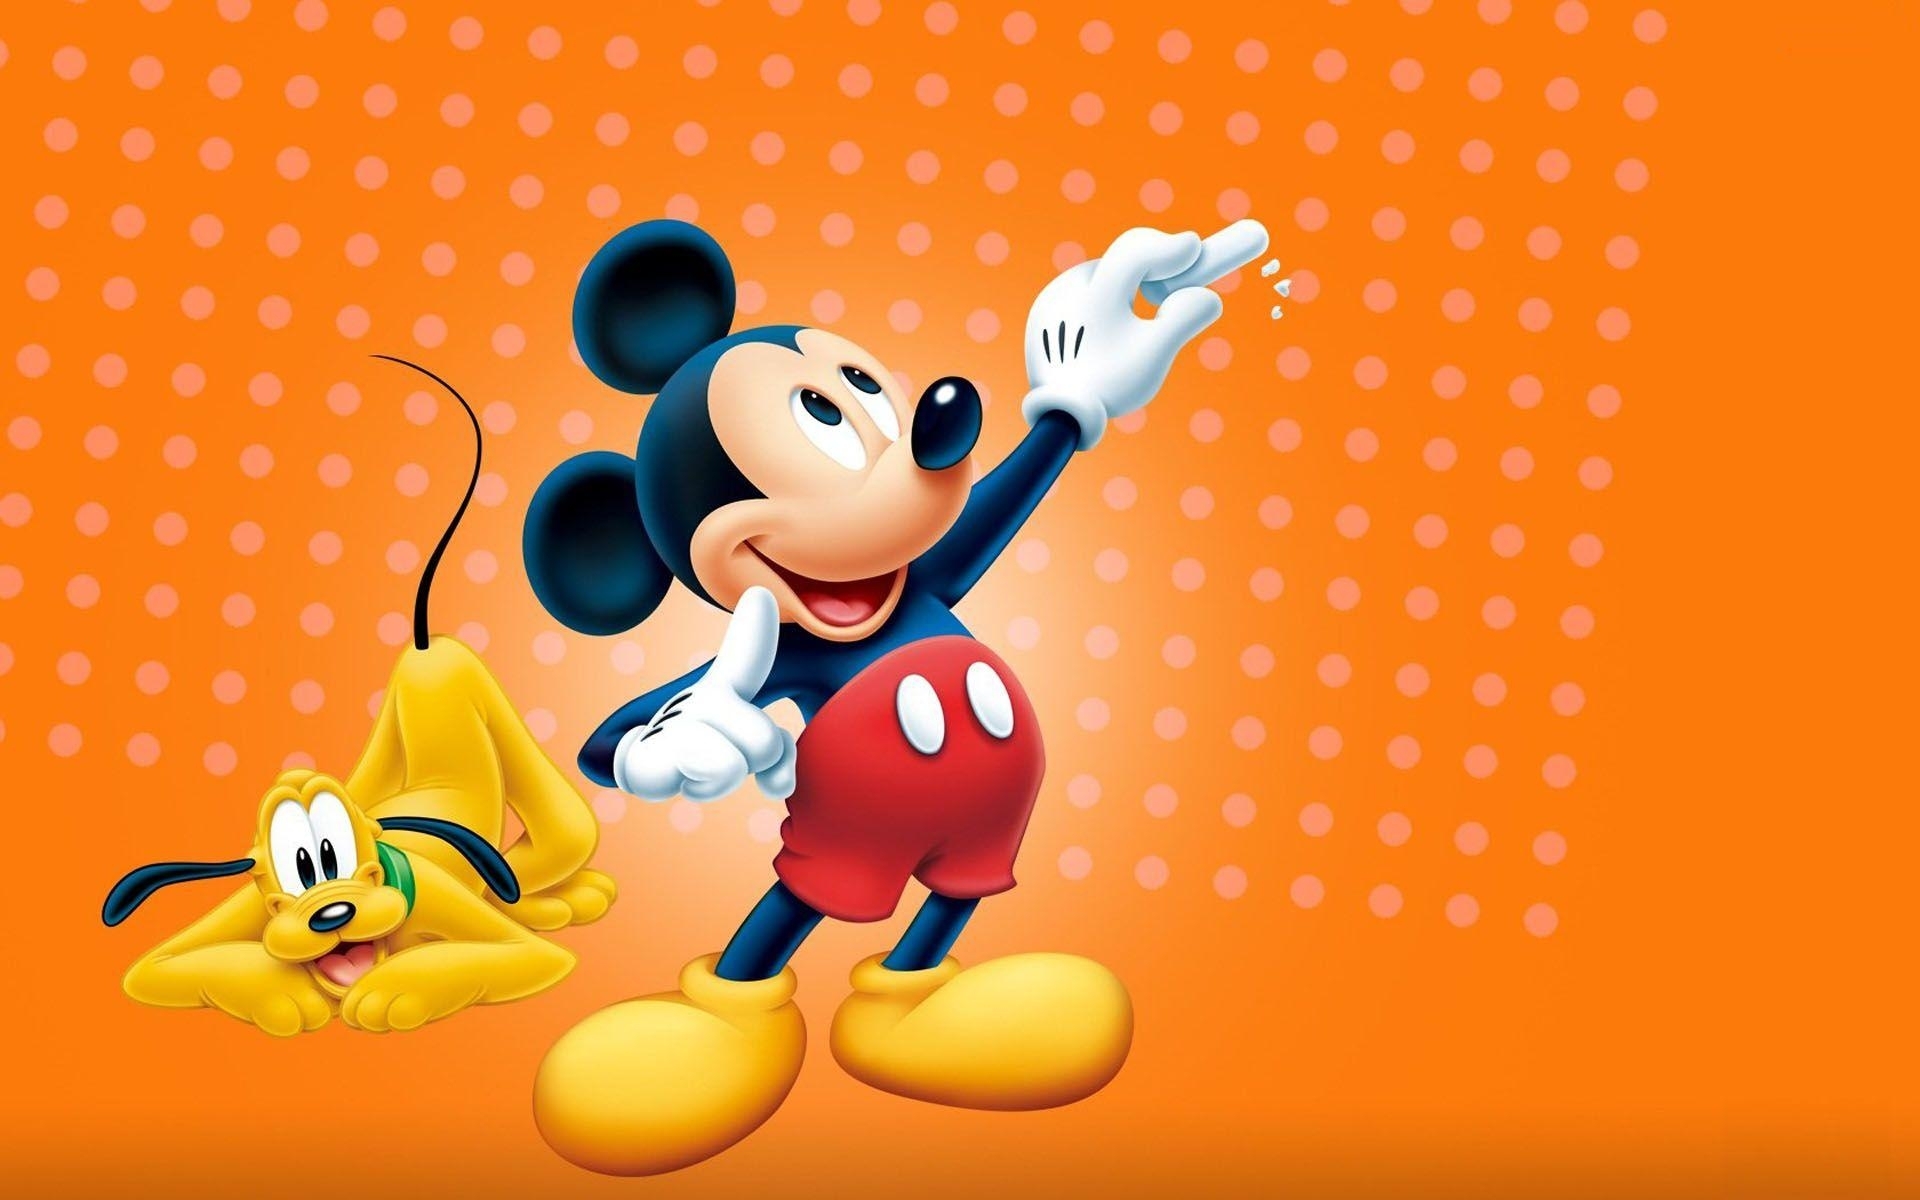 10 New Mickey Mouse Wallpaper Hd FULL HD 1080p For PC Desktop